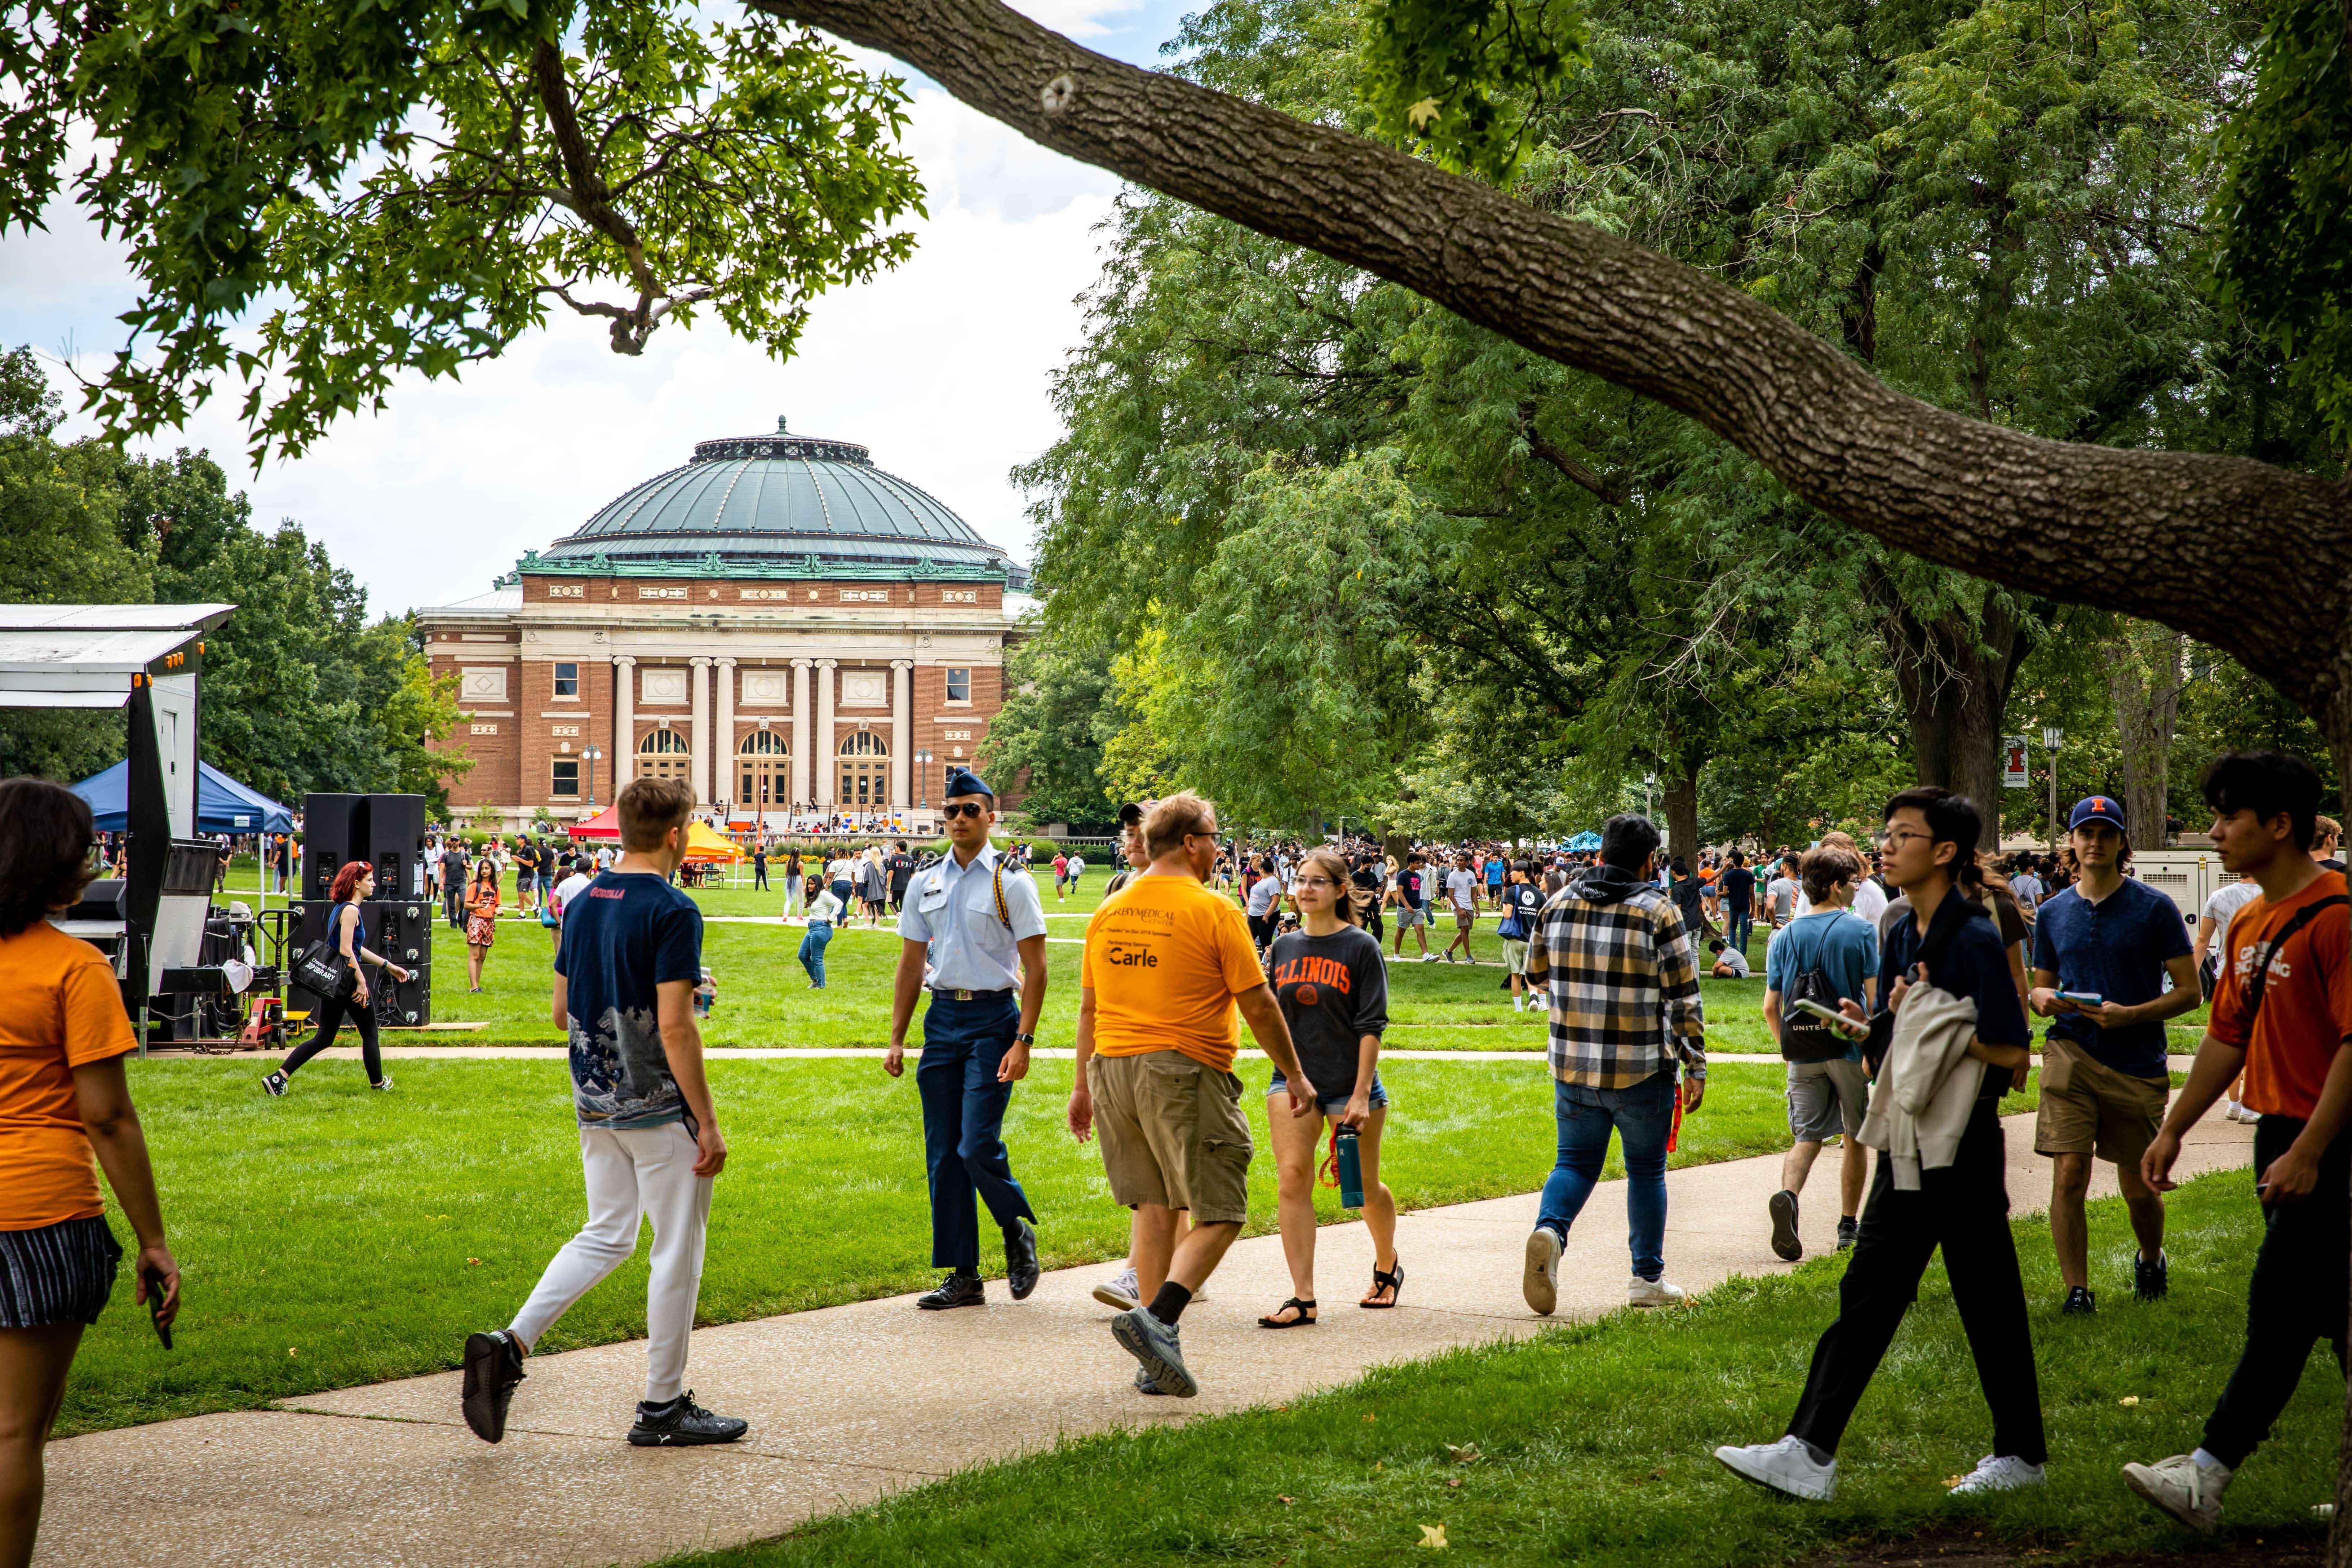 200+ Top University of Illinois at Urbana-Champaign Online Courses [2023]